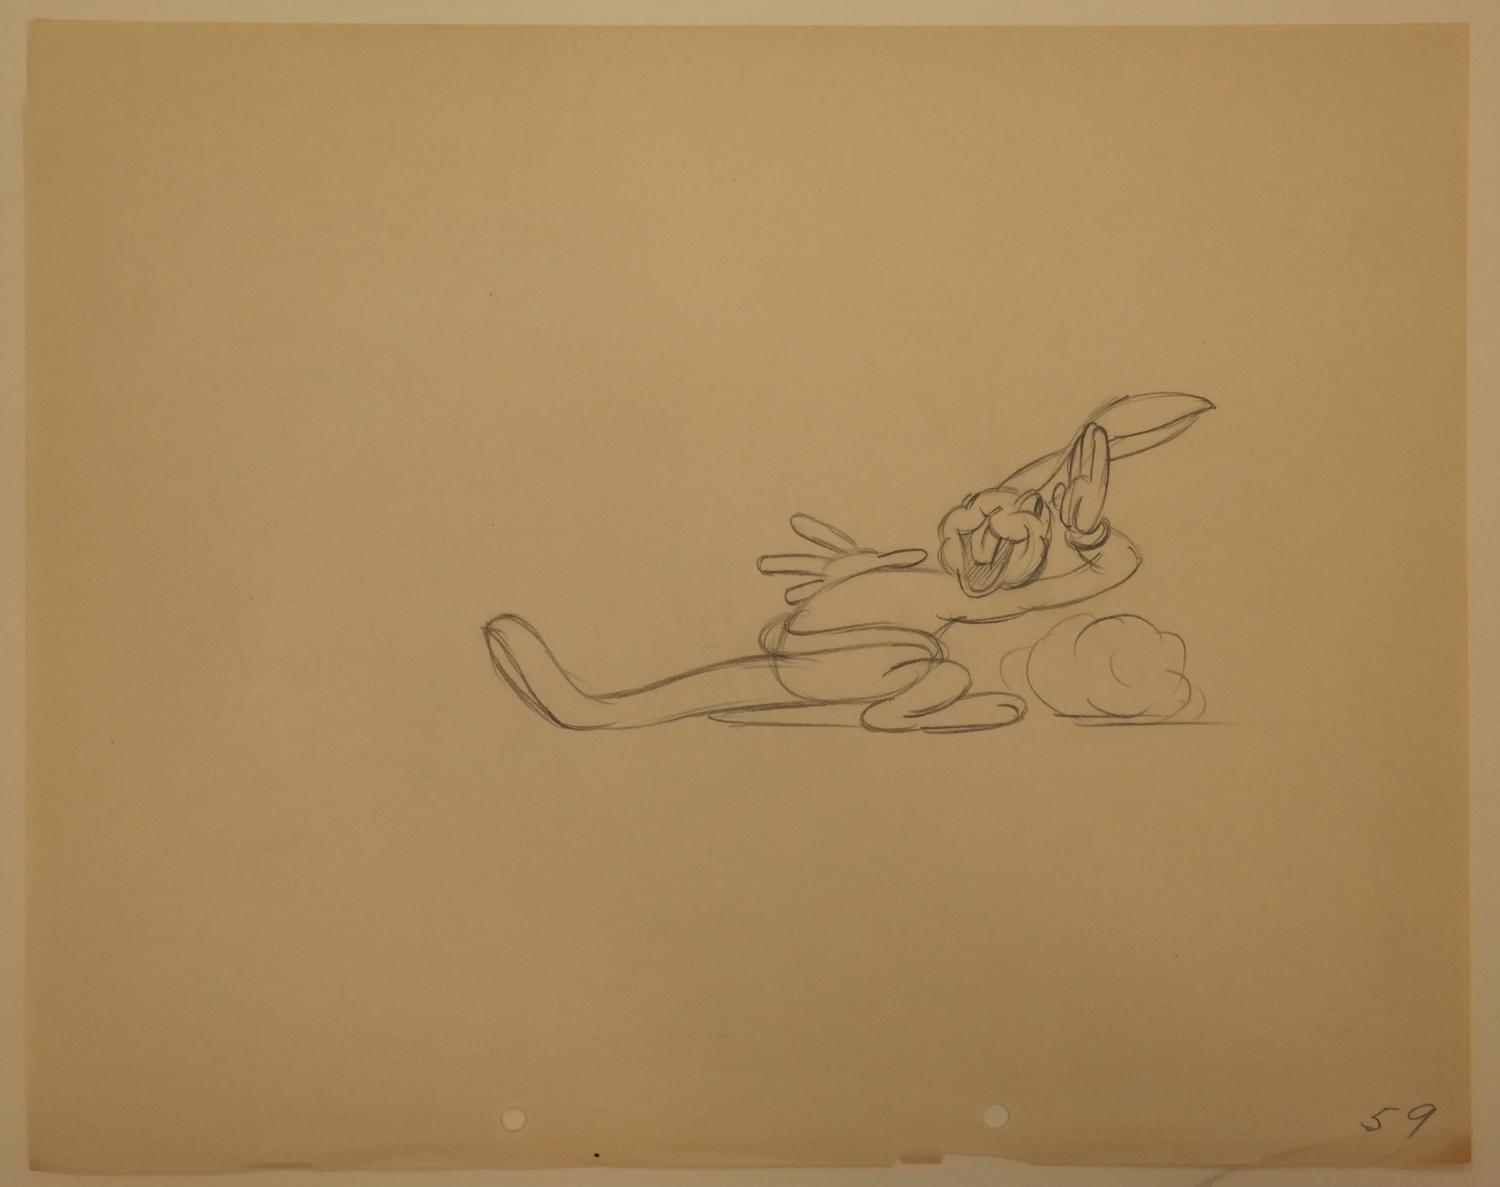 The Tortoise and the Hare Production Drawing - ID:martortoise6187 